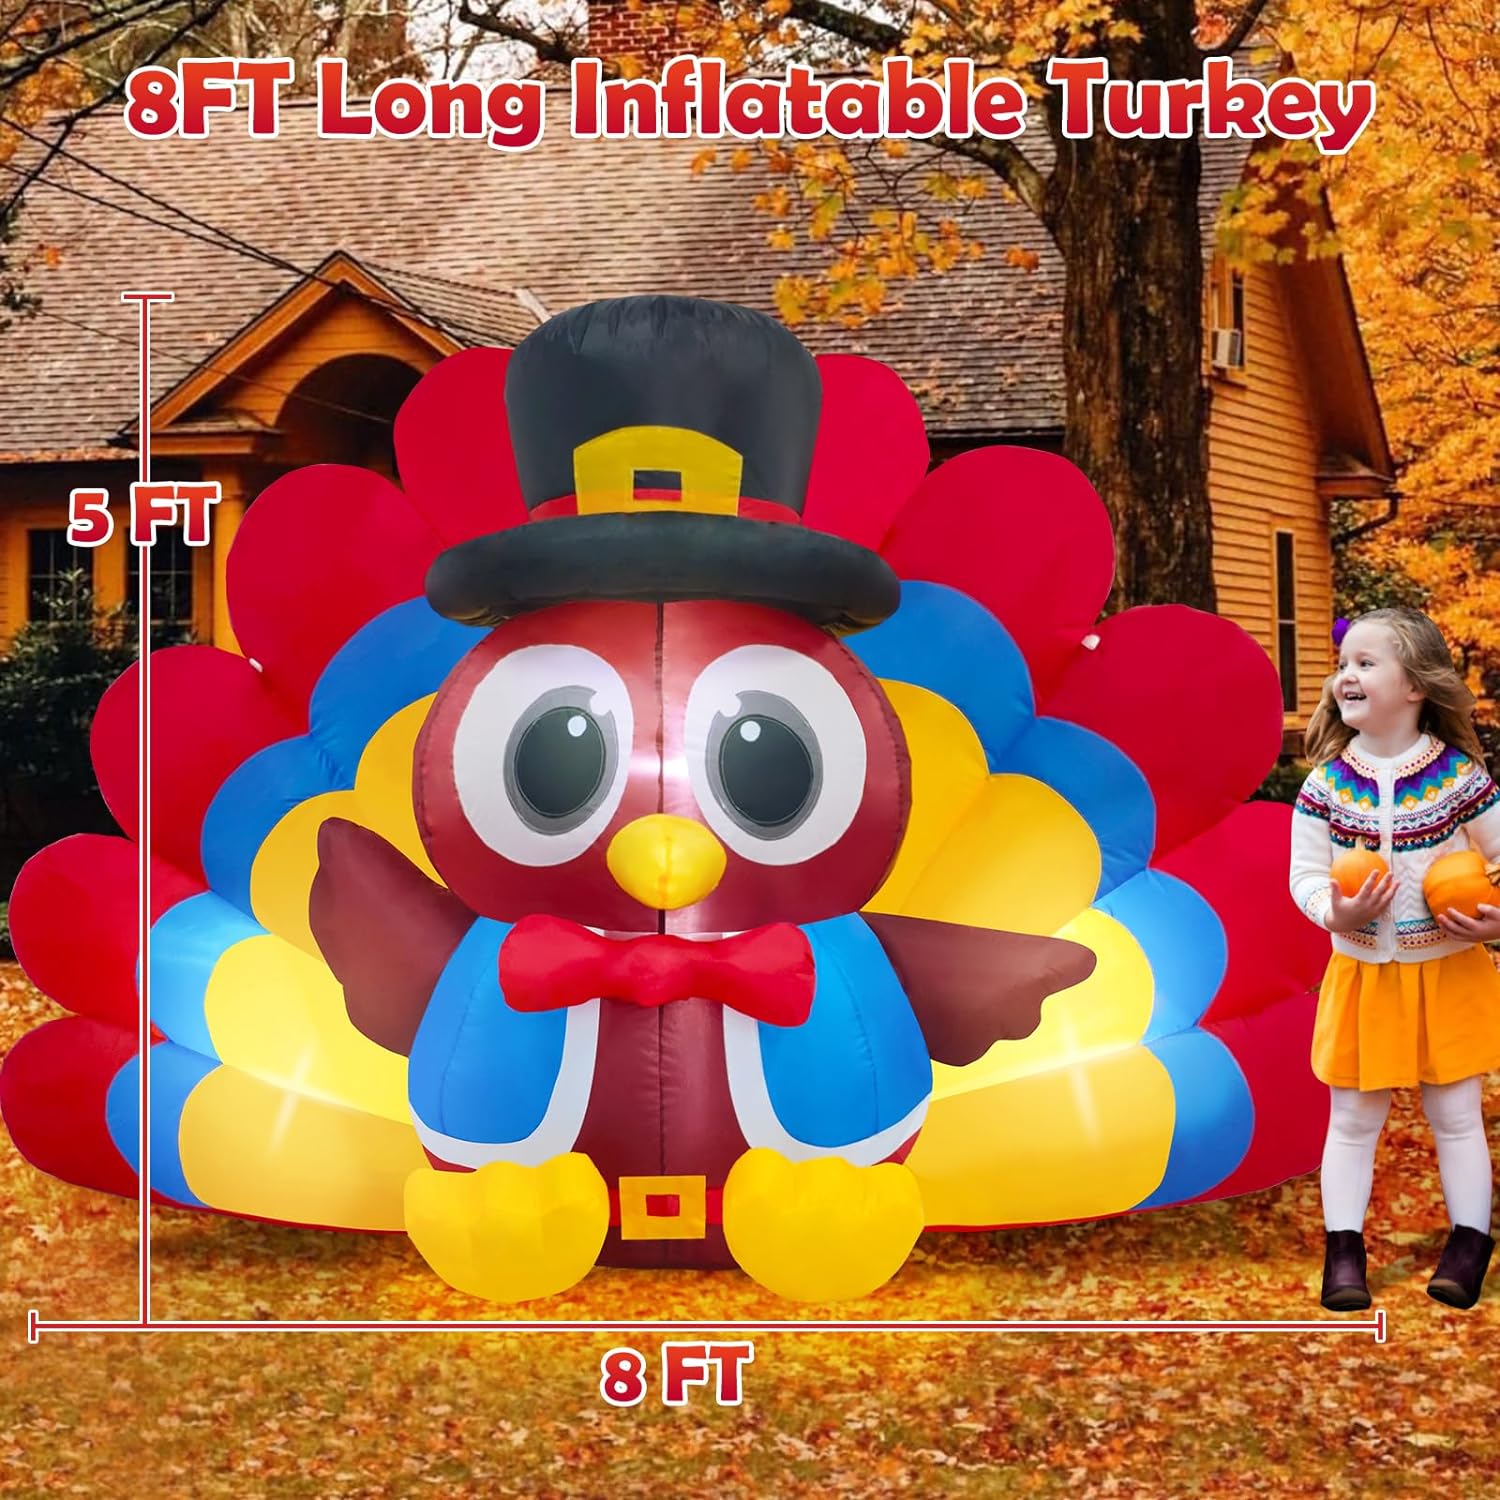 Inflatable Turkey Thanksgiving Outdoor Decorations with Colorful Big Tail & Pilgrim Hat Built-in LED Lights Blow up Yard Decoration